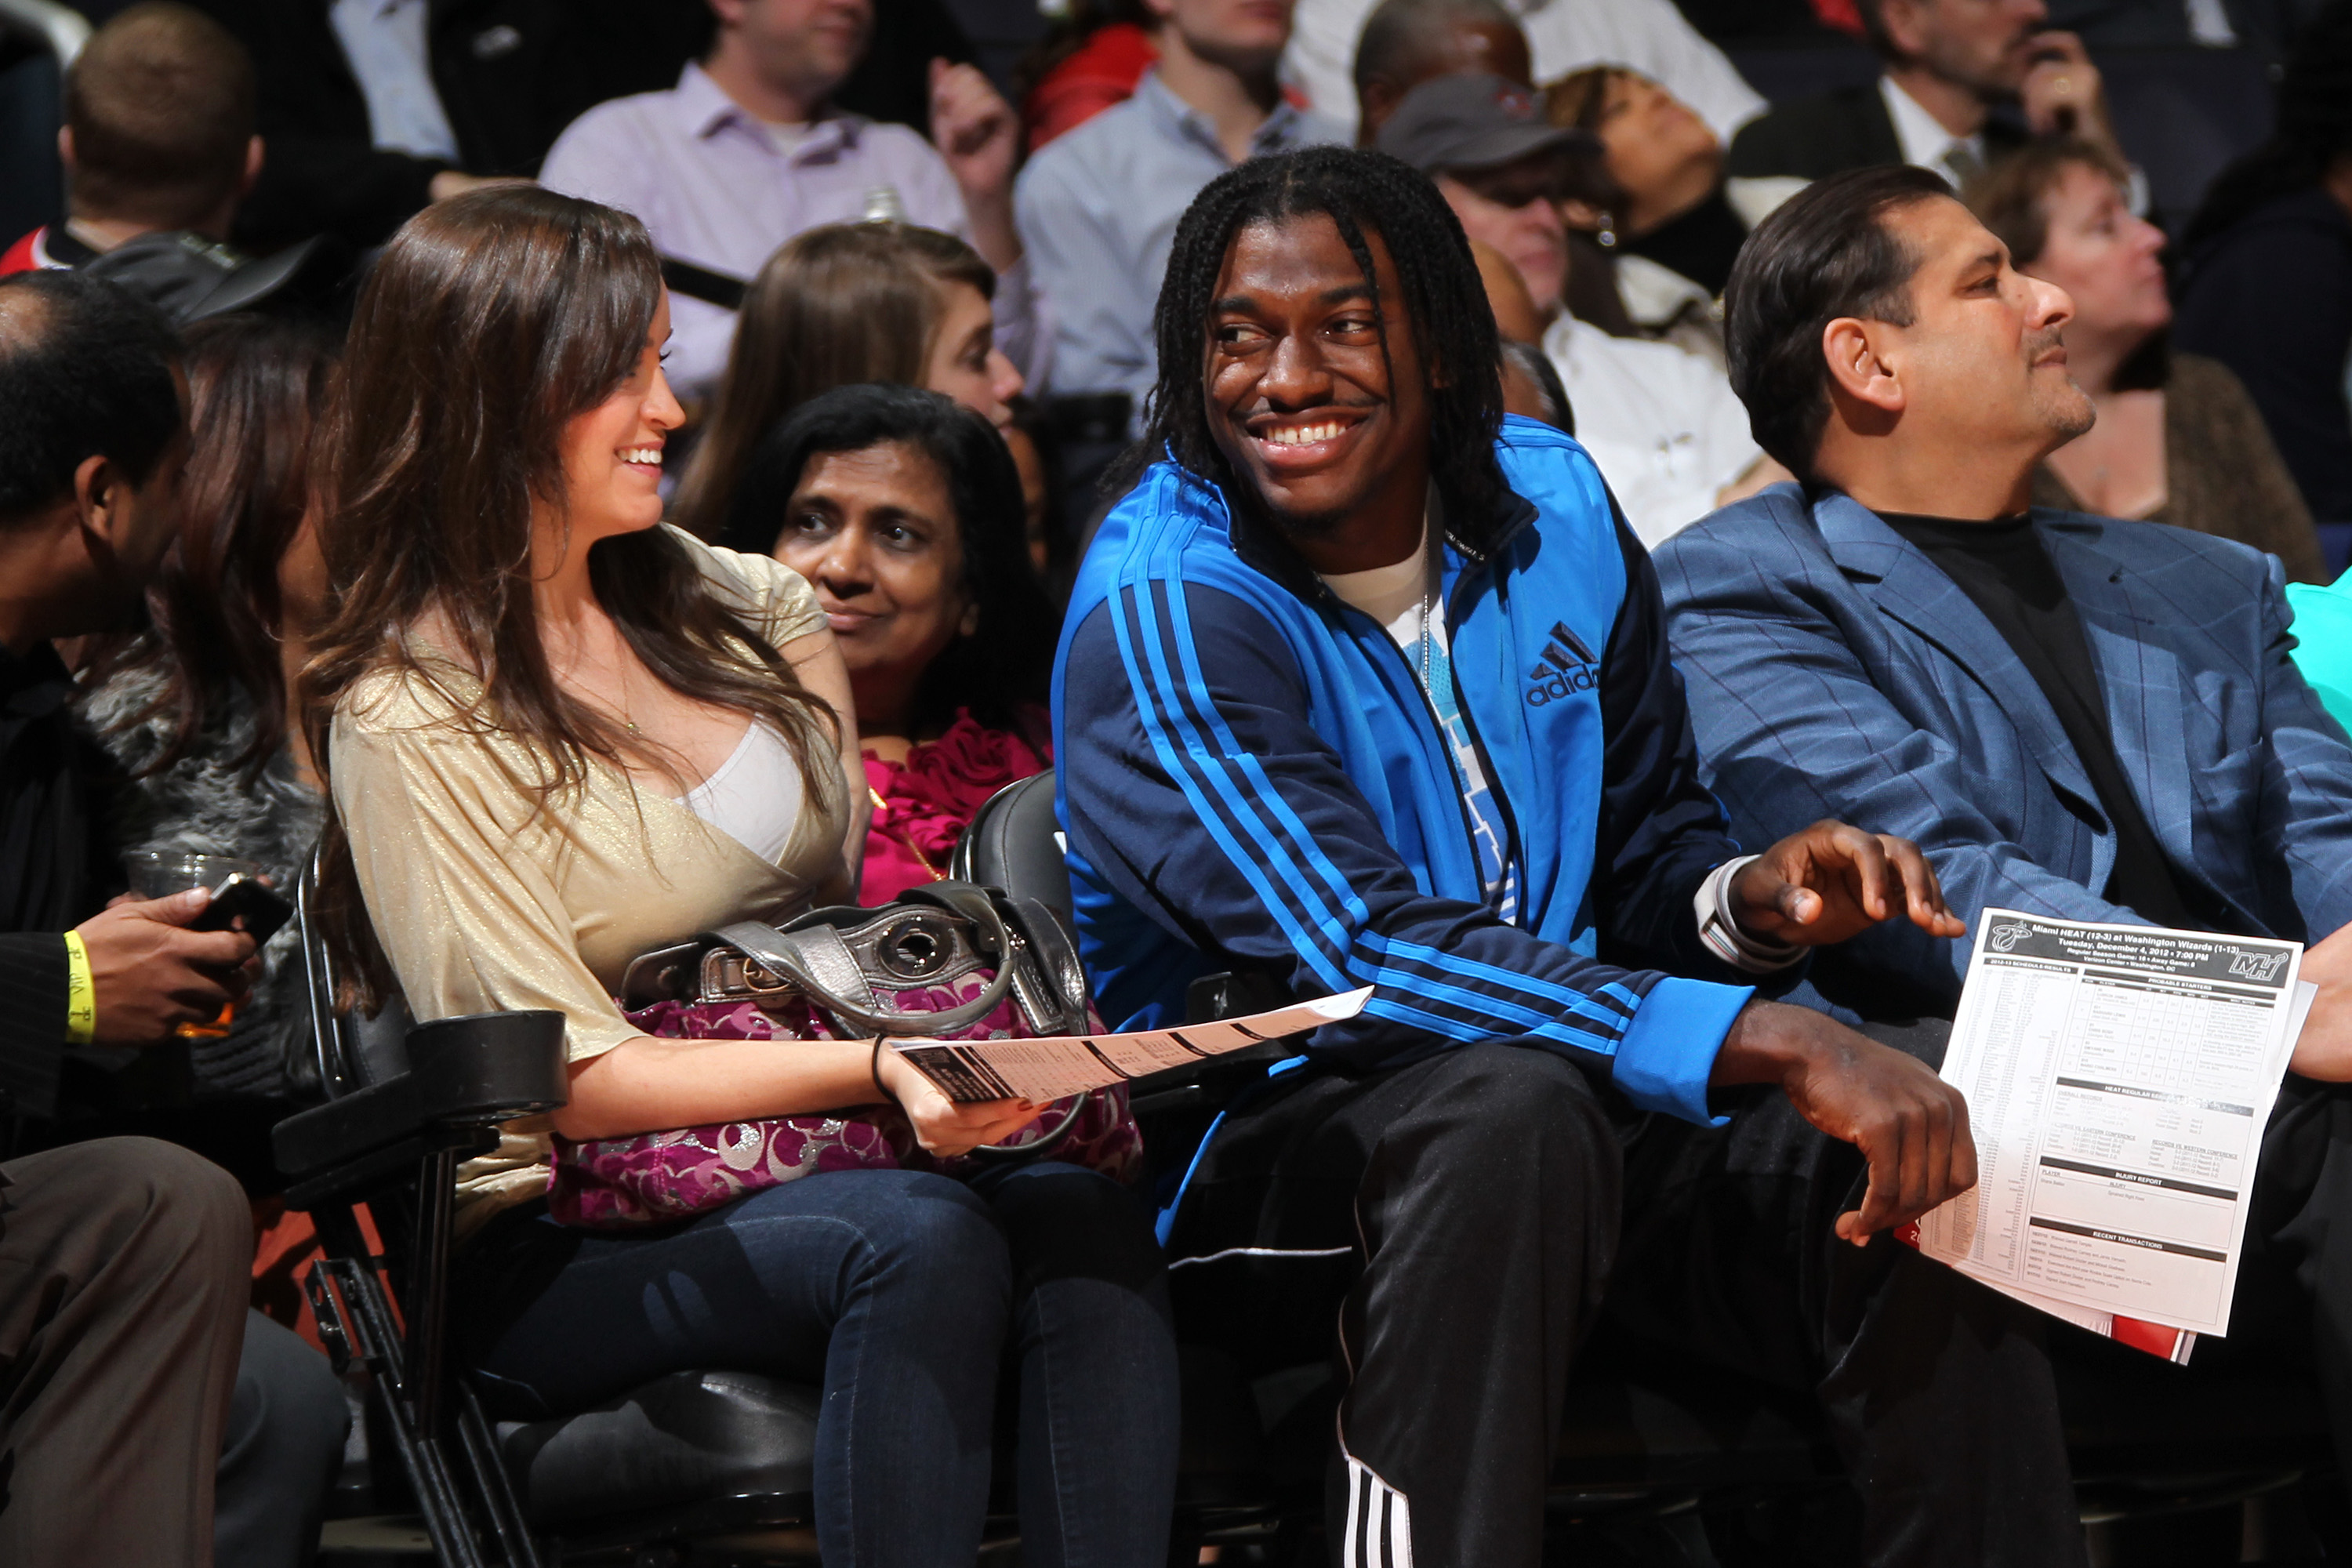 Rebecca Liddicoat and Robert Griffin III at the Washington Wizards game against the Miami Heat on December 4, 2012, in Washington, DC. | Source: Getty Images